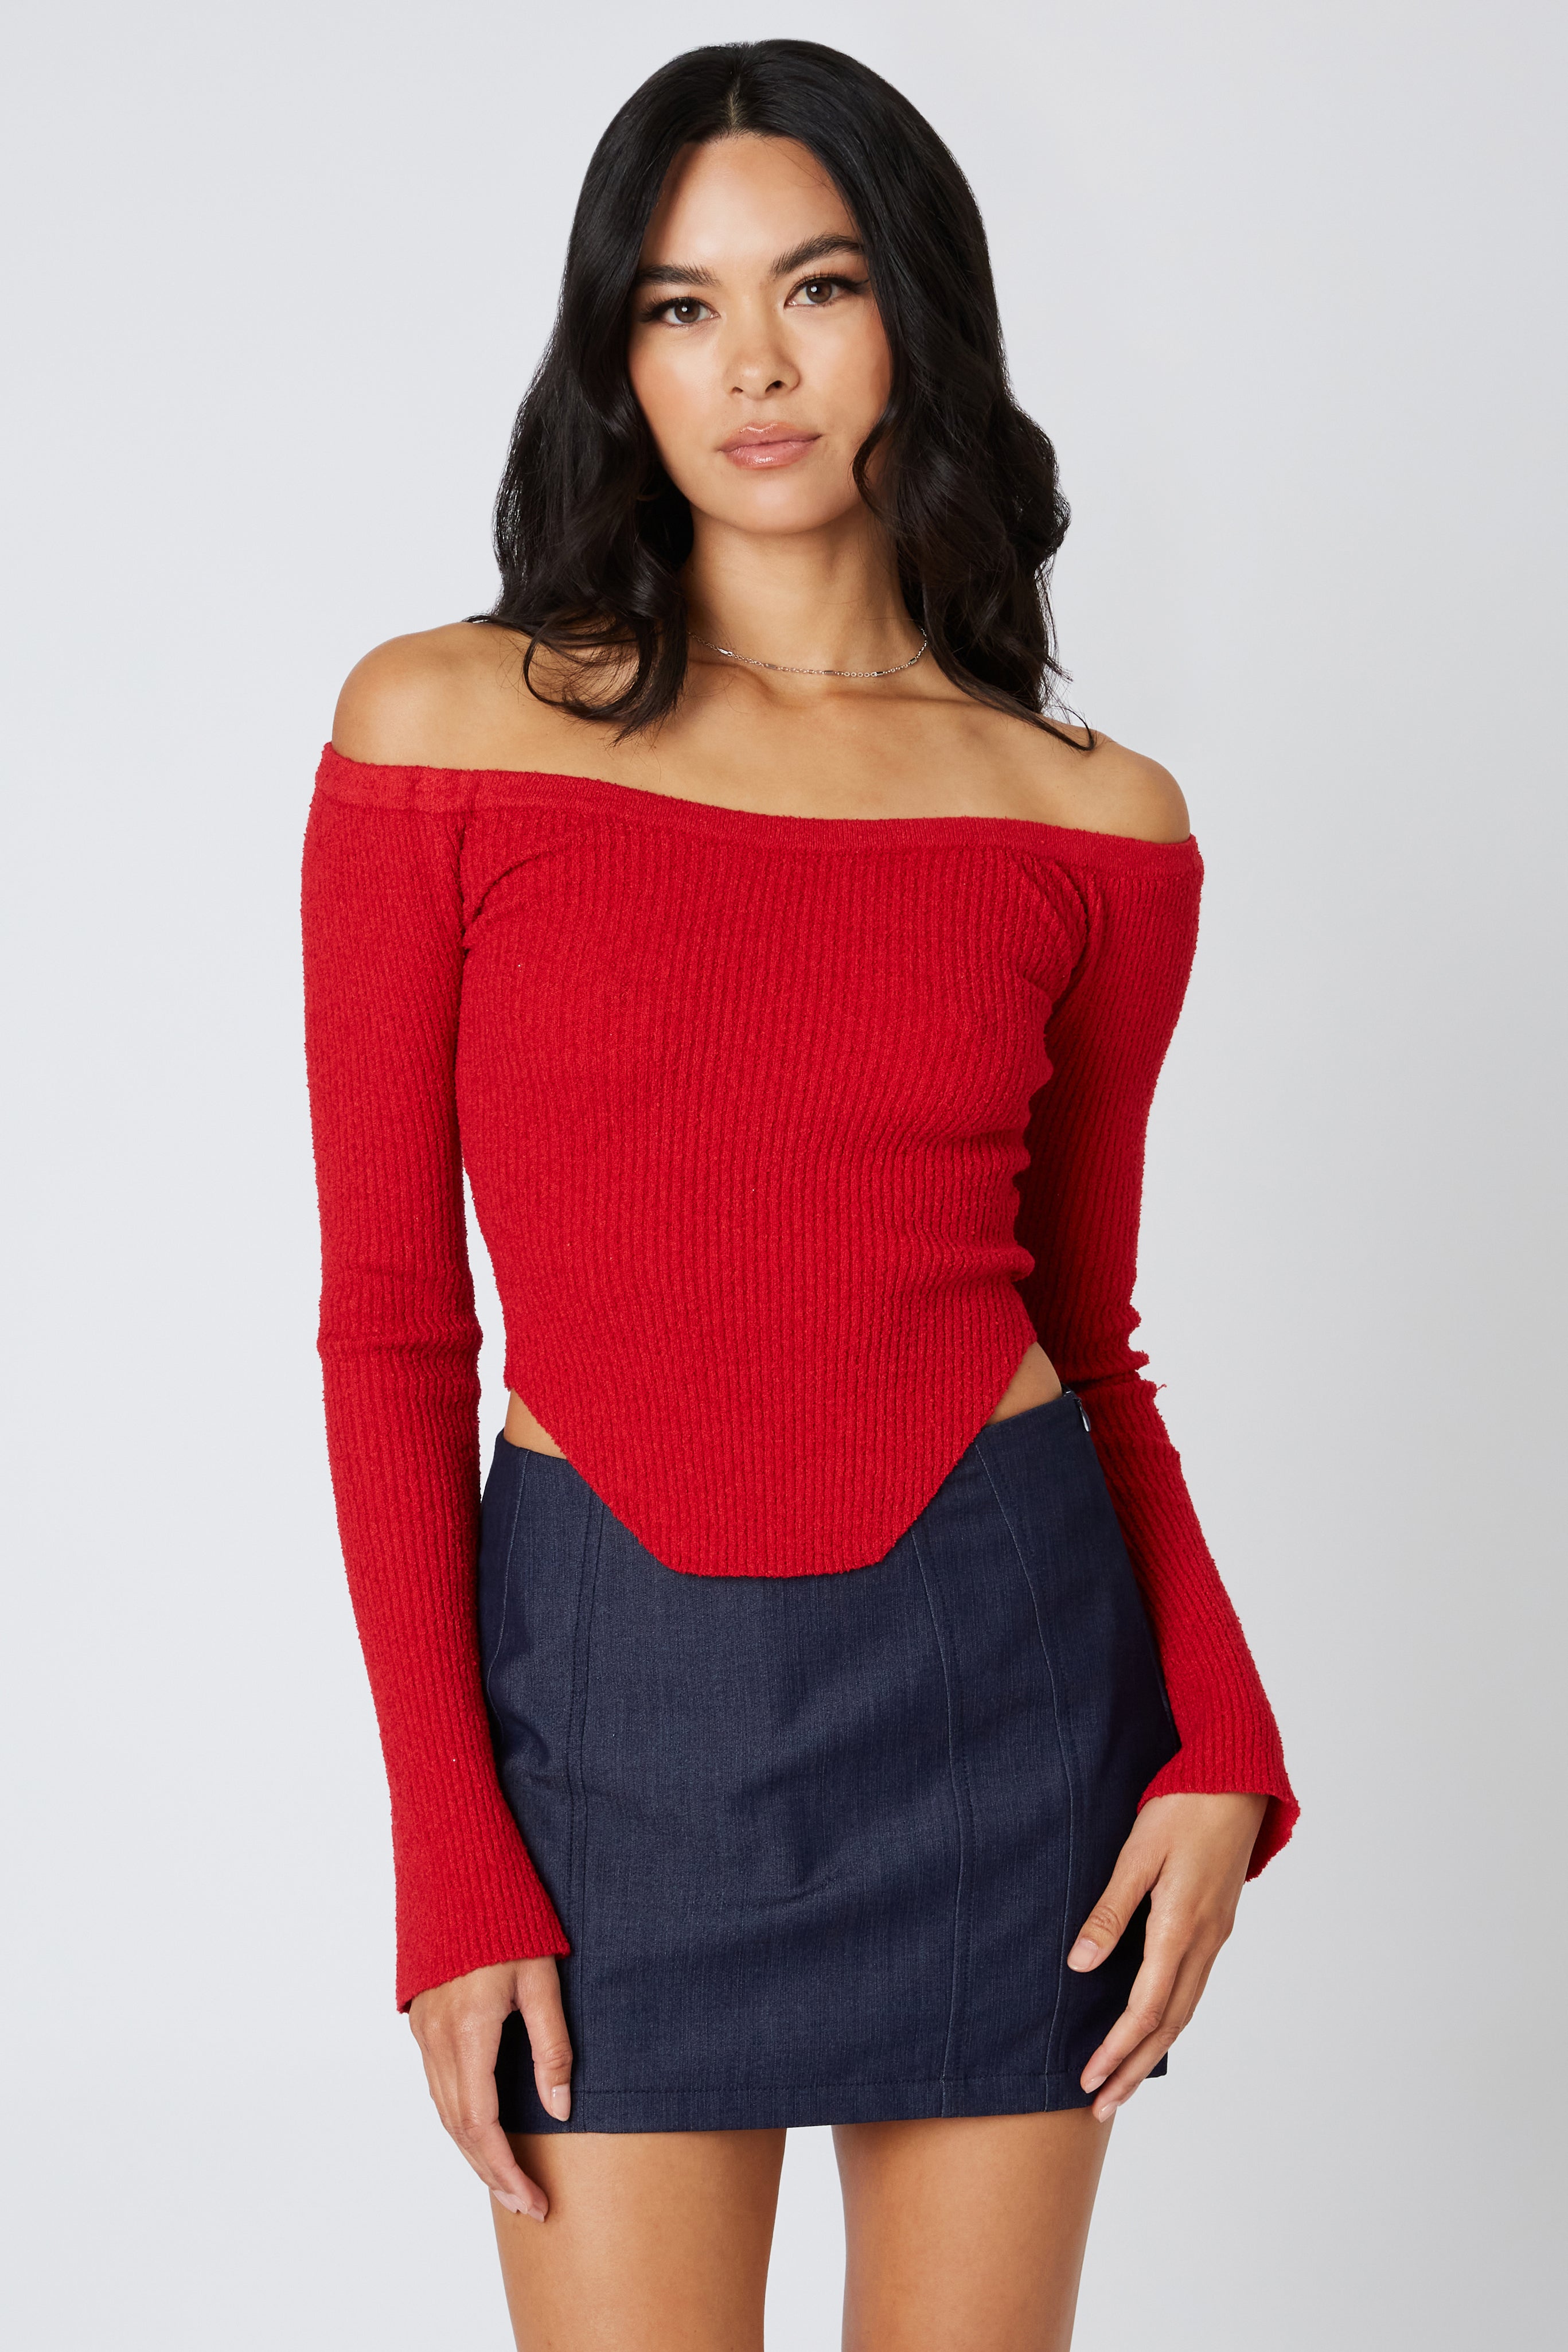 Off the Shoulder Knit Sweater in Red Front View